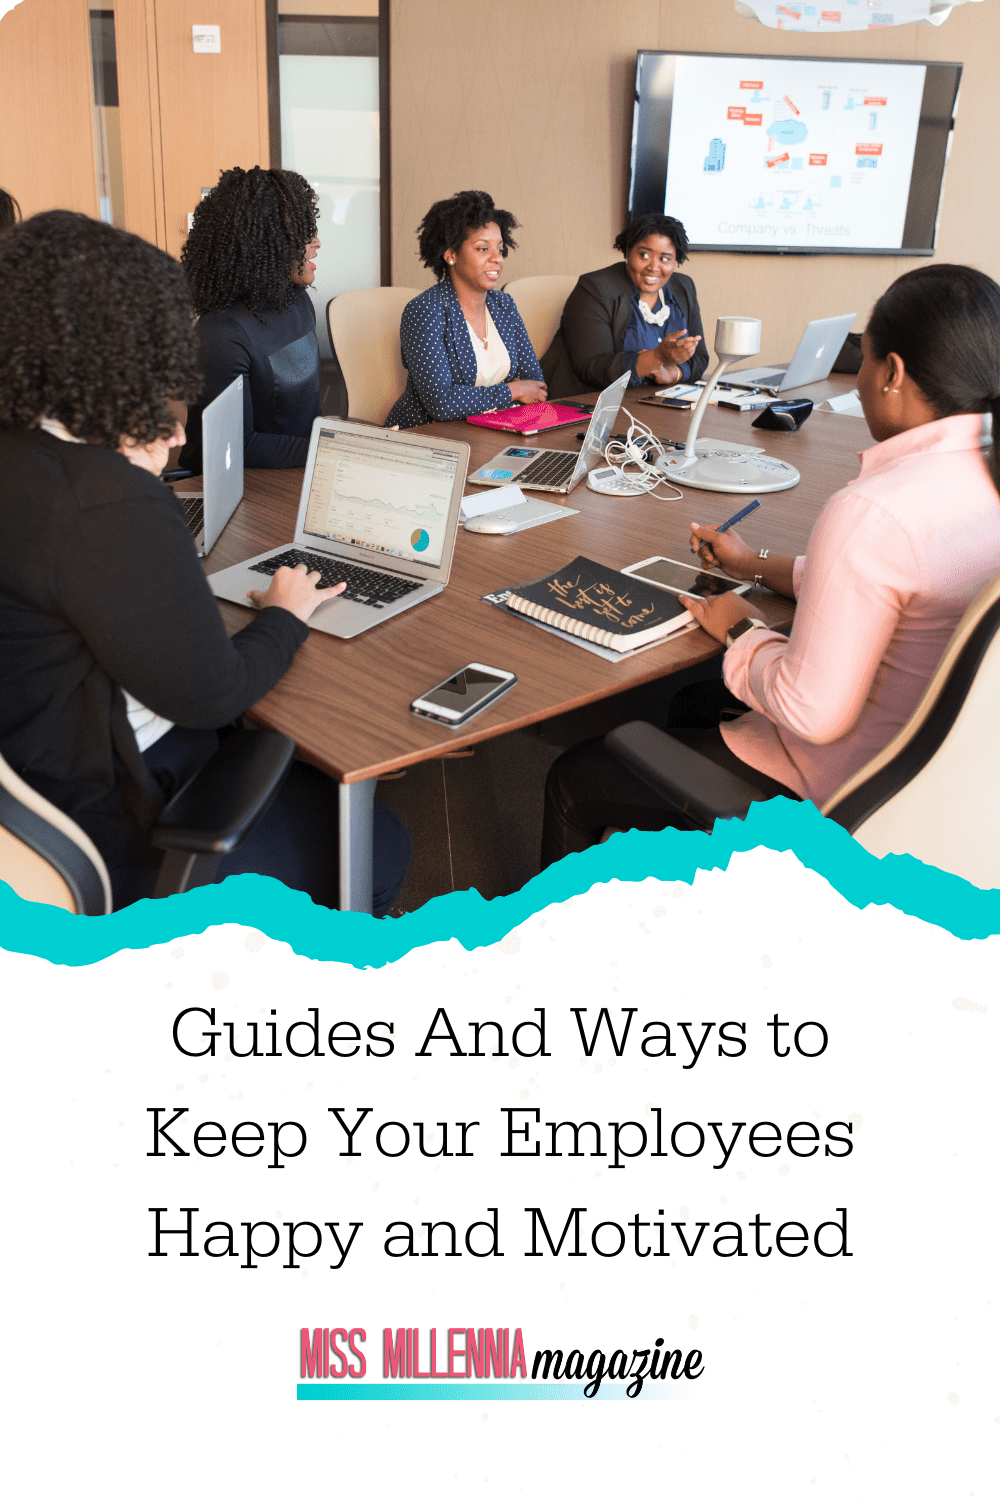 Guides And Ways to Keep Your Employees Happy and Motivated